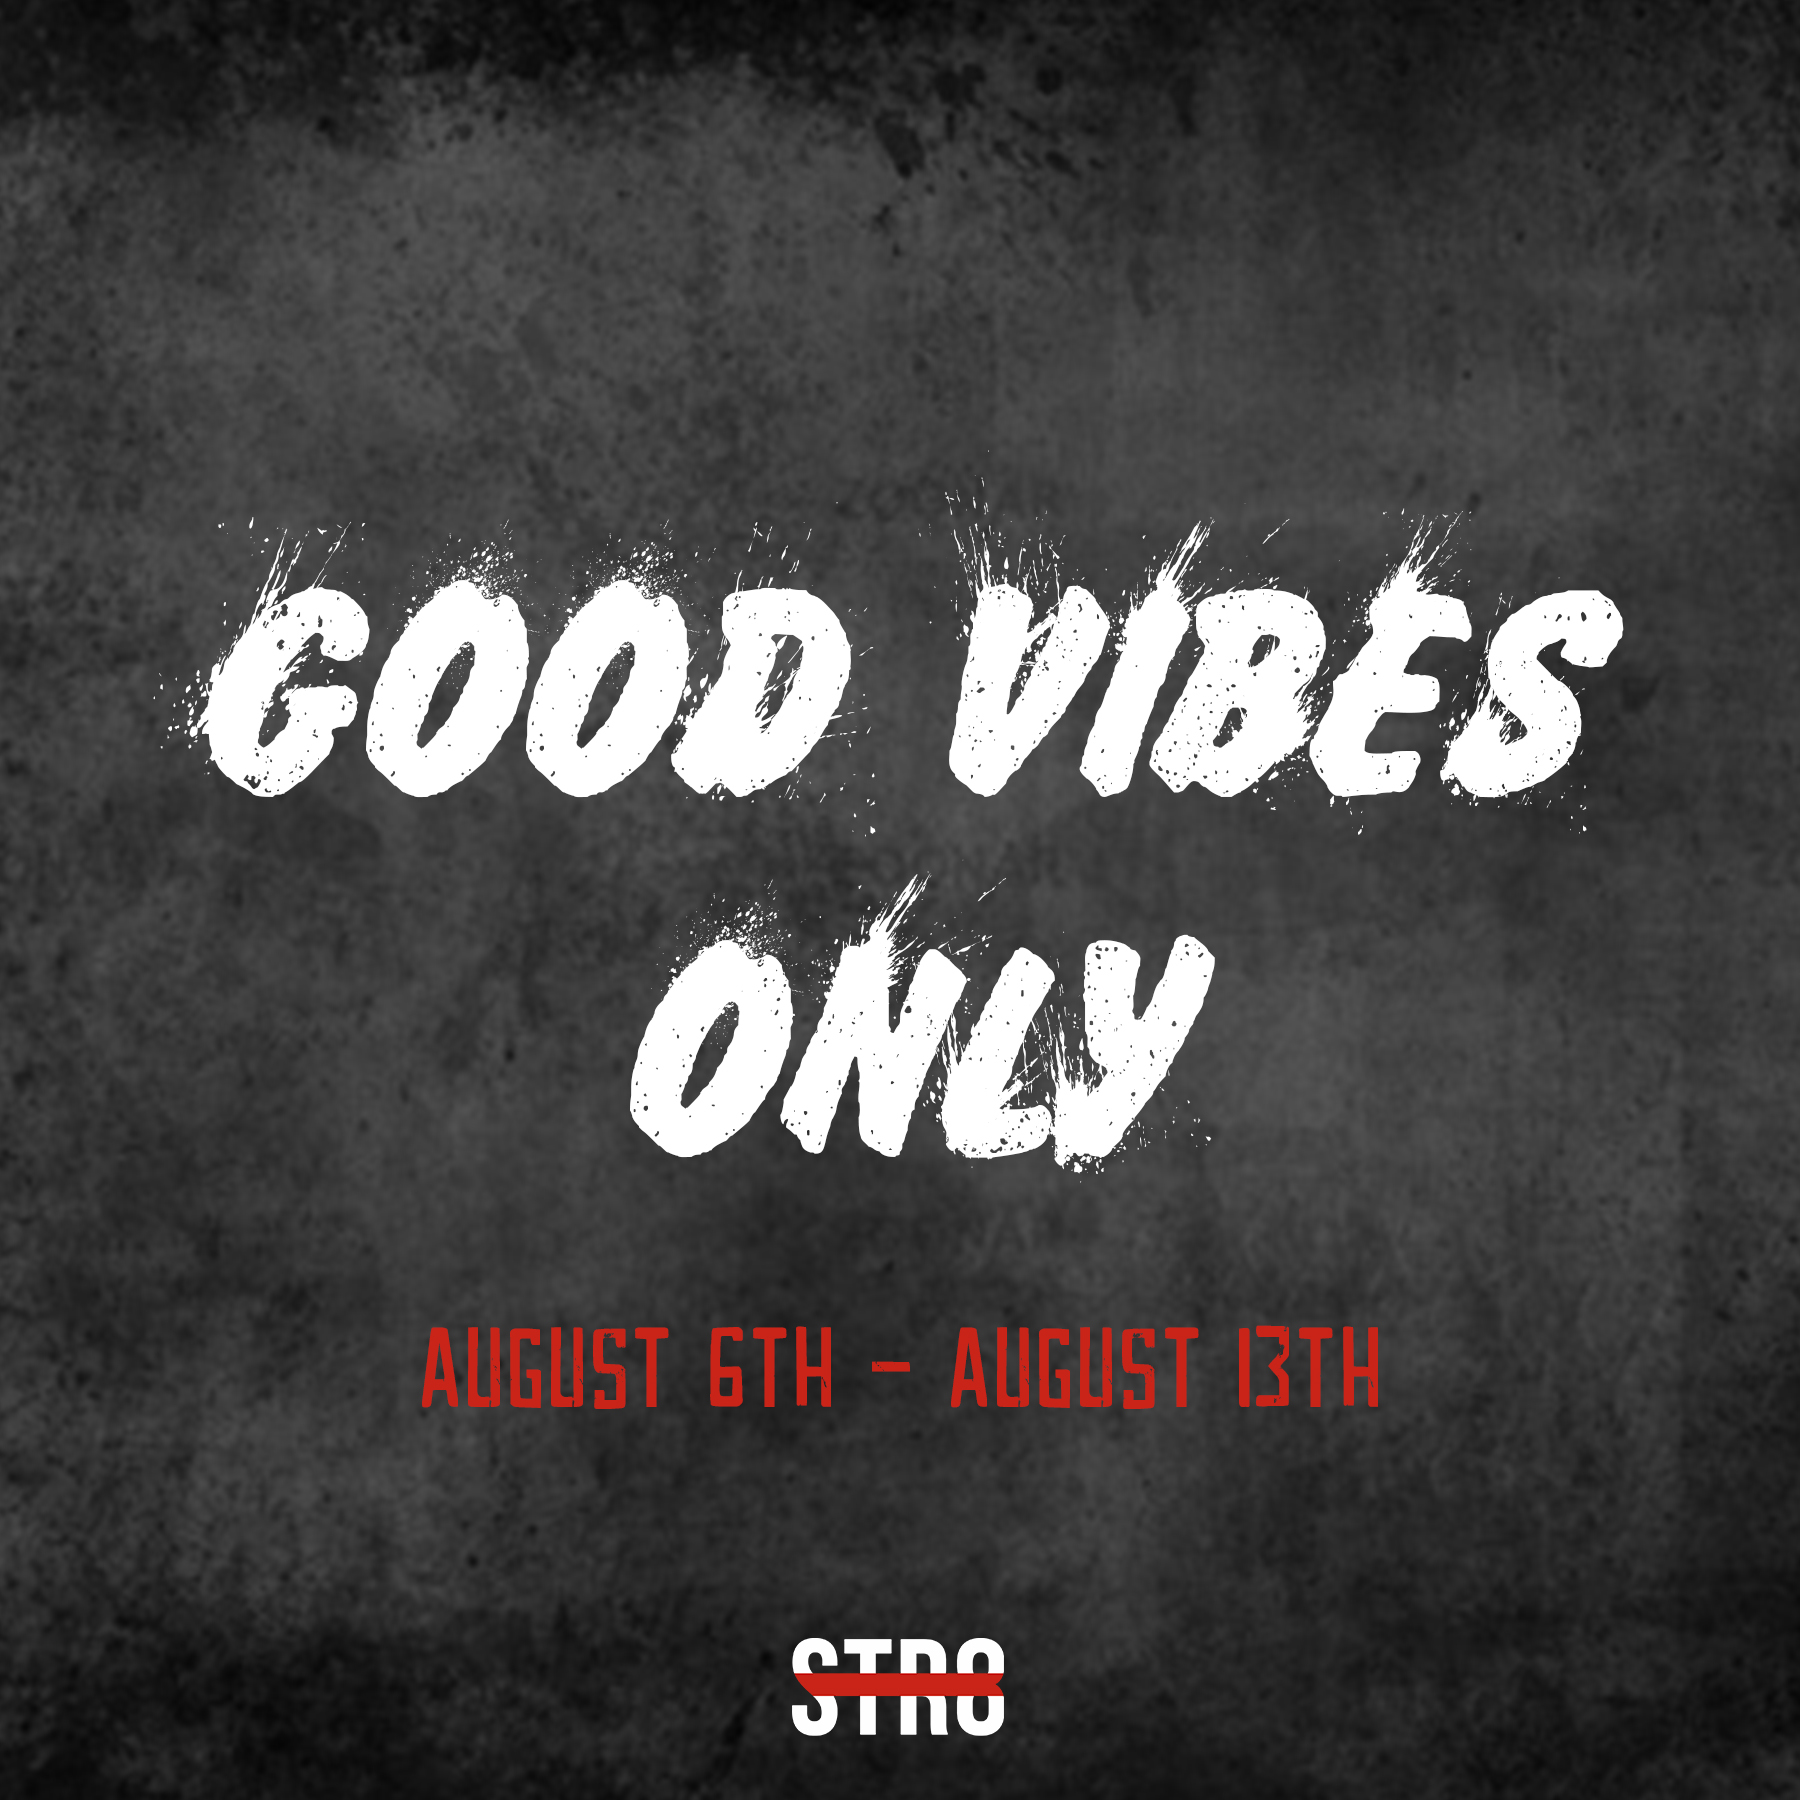 Good Vibes Only: August 6th – August 13th